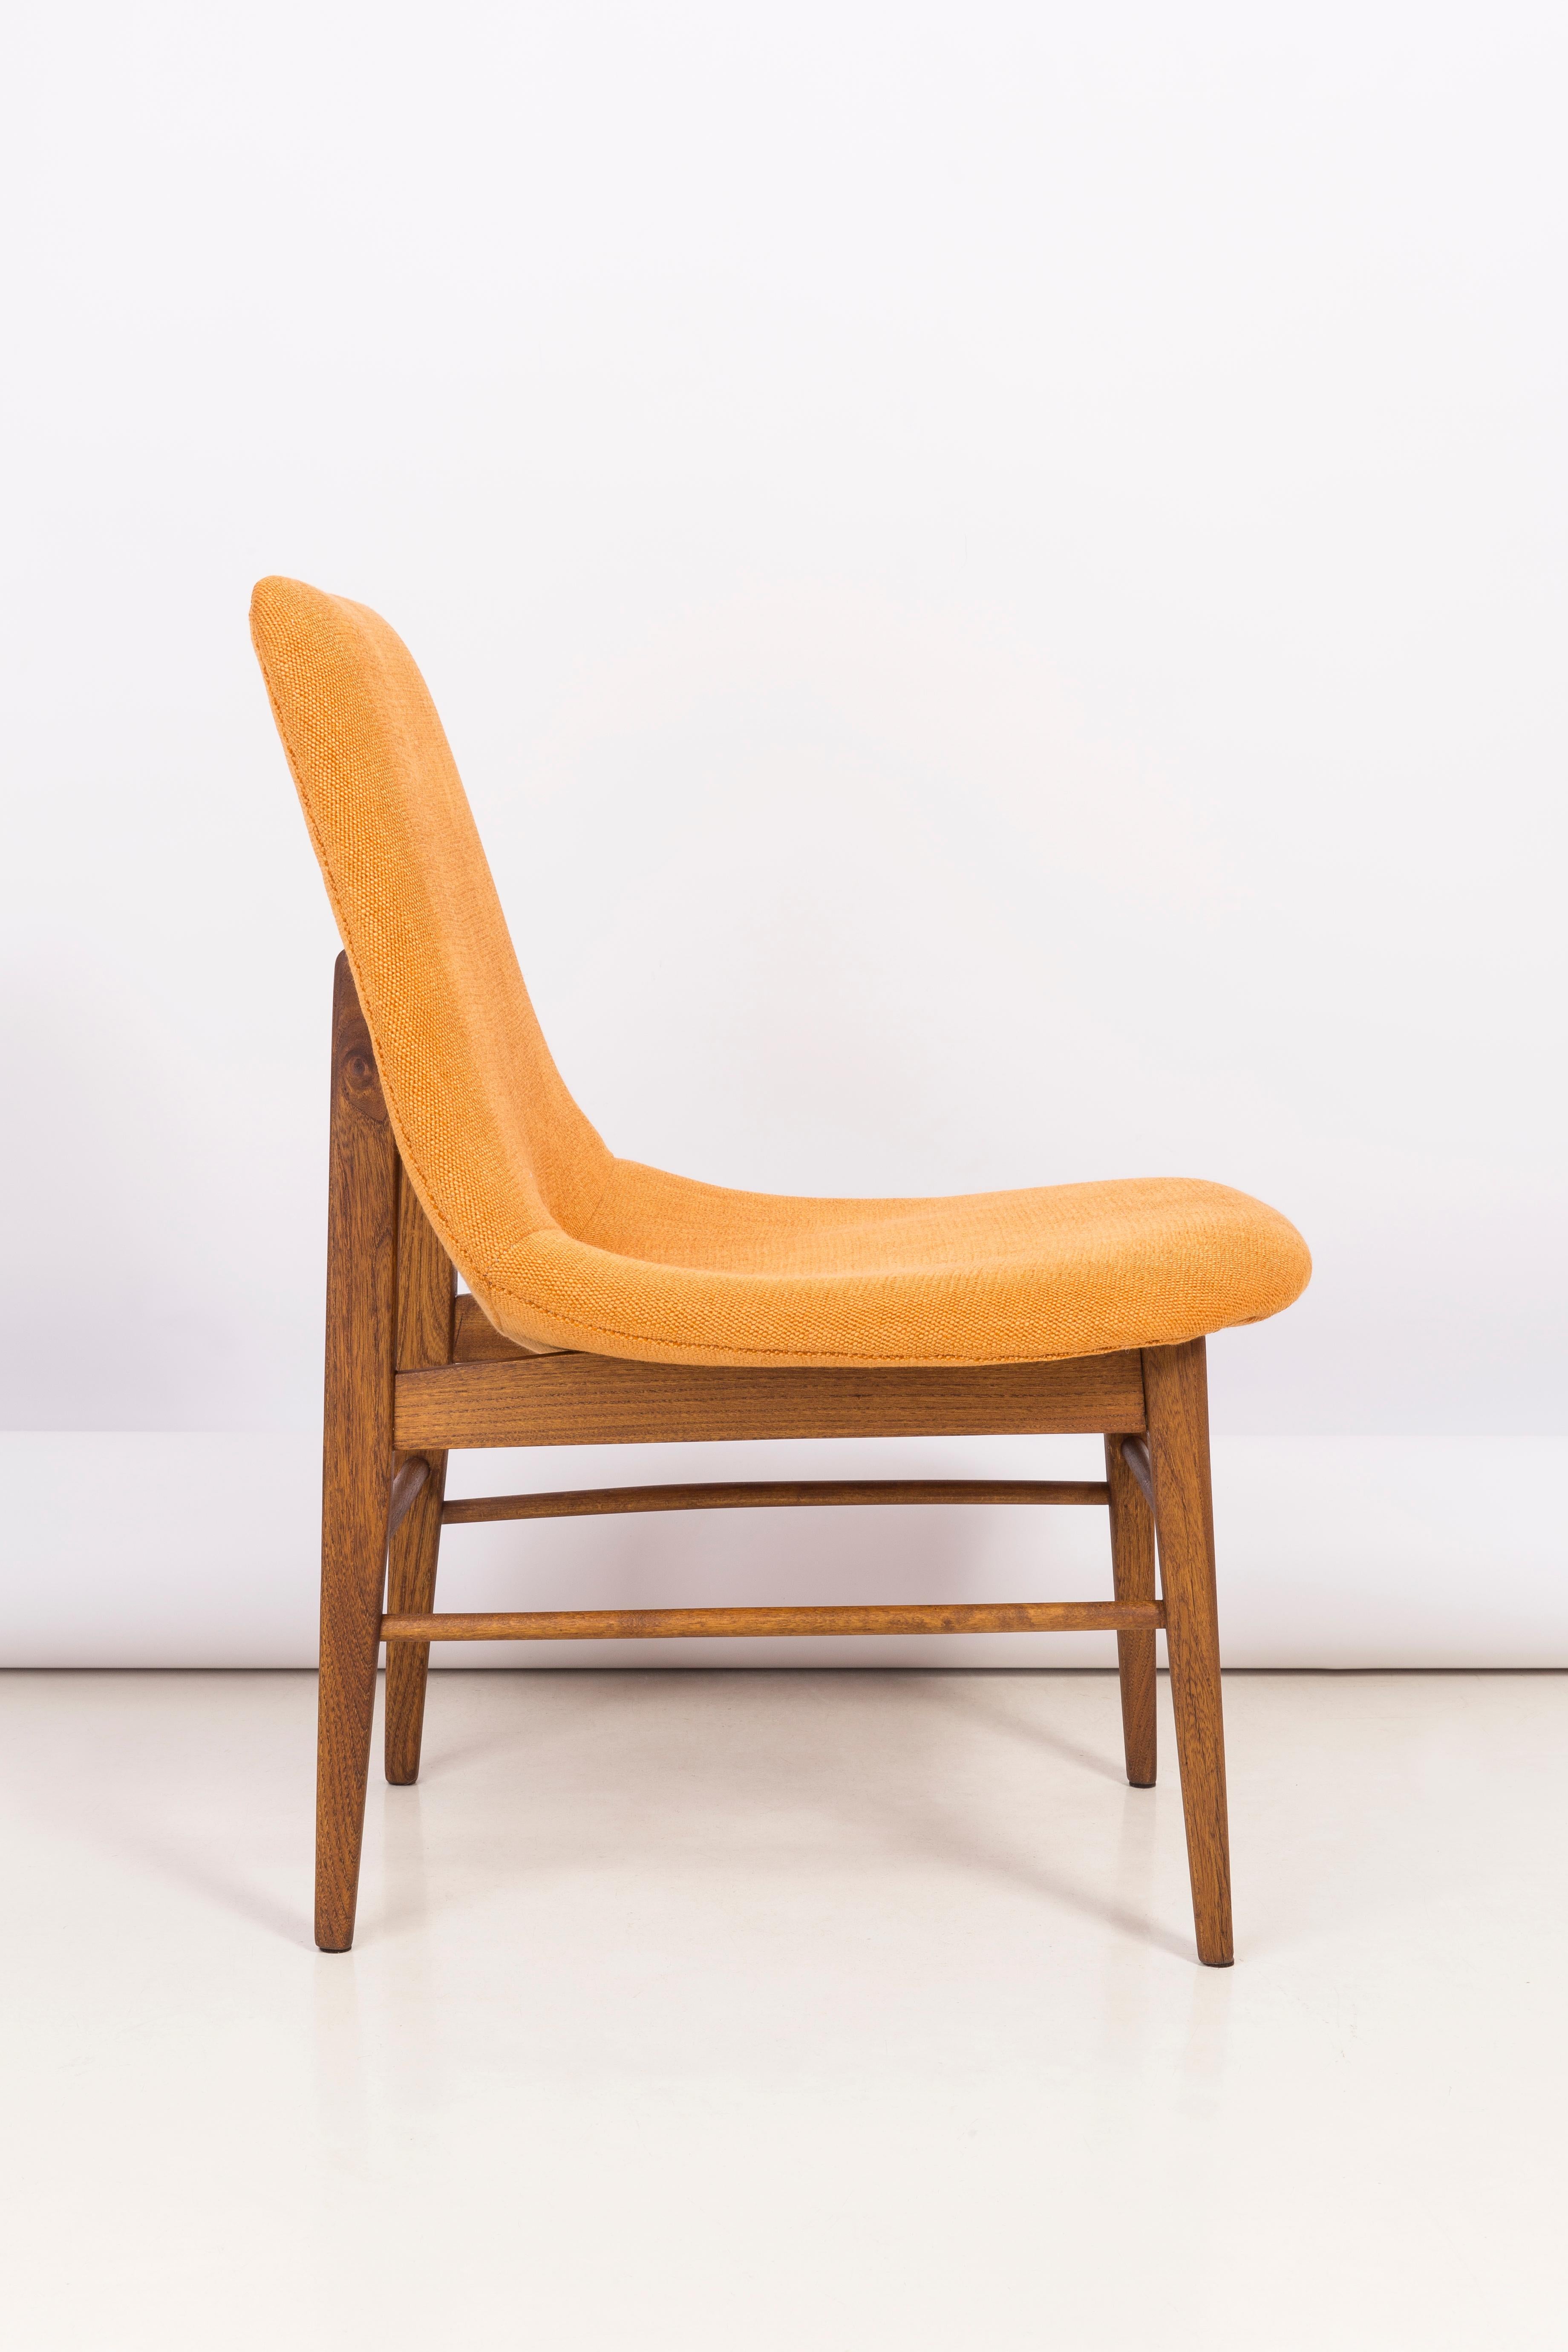 Polish Set of Two Rare 20th Century Orange Shell Chairs, H. Lachert, 1960s For Sale